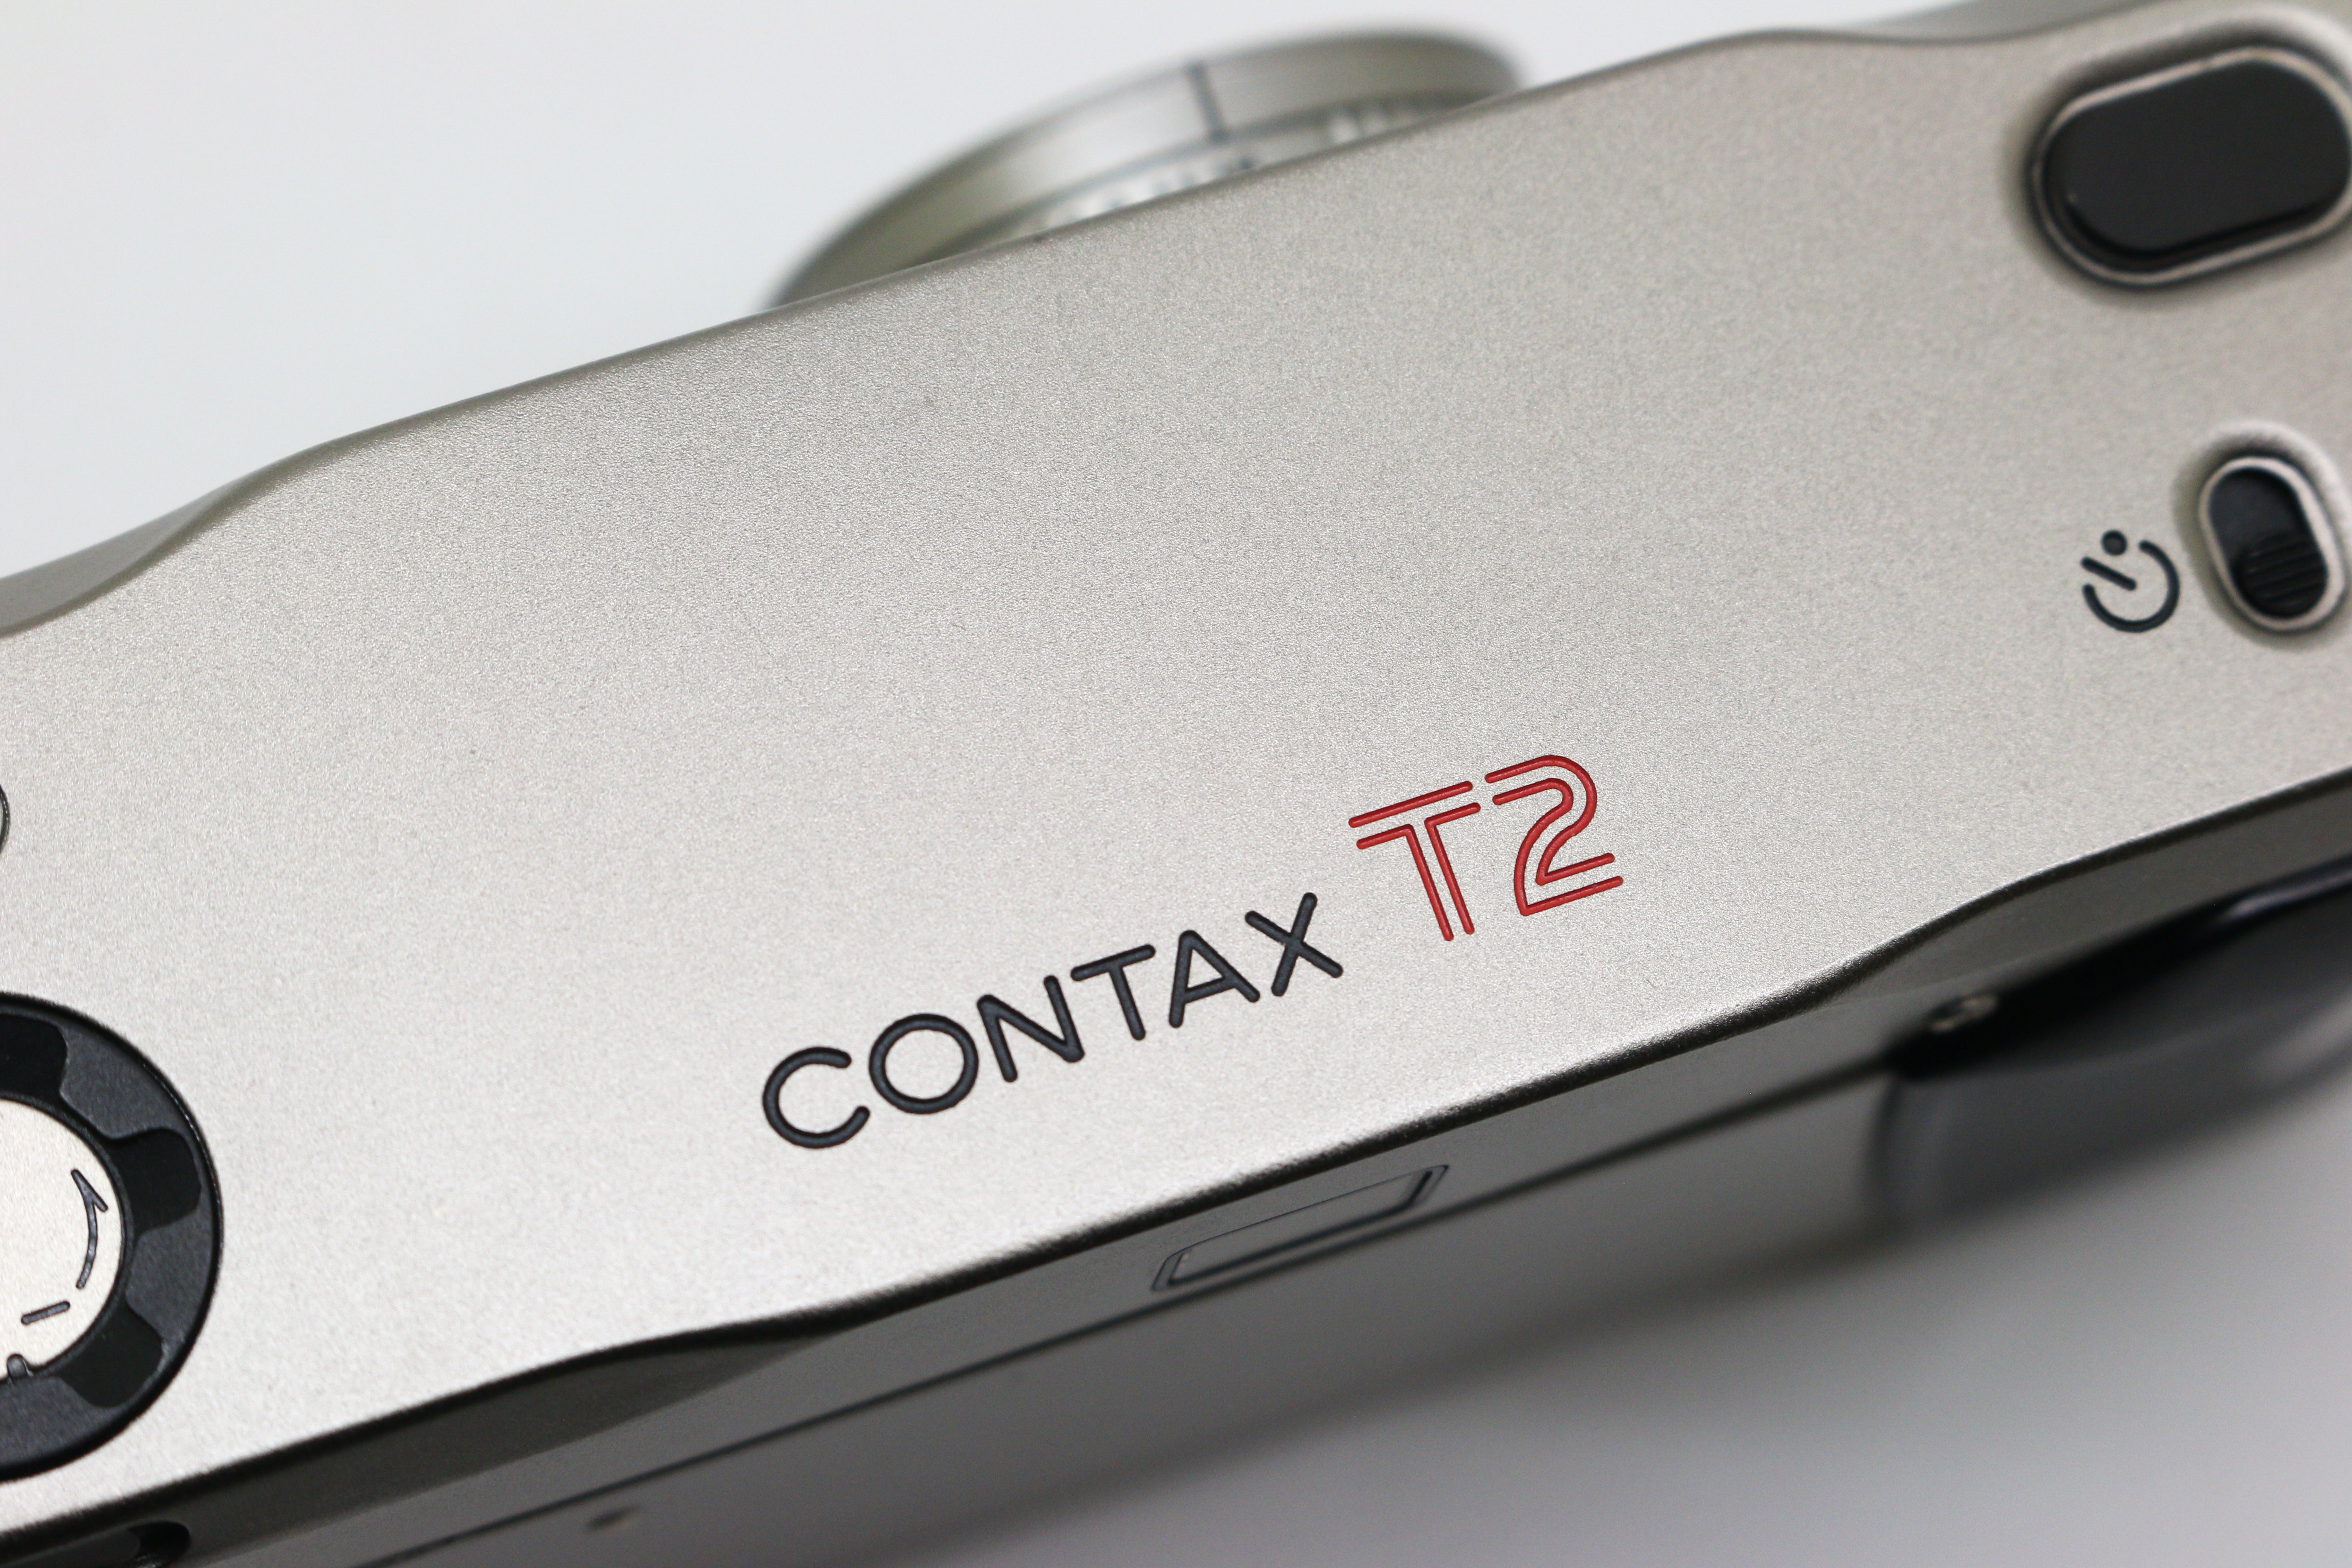 Contax T2 'Champagne' (Boxed)